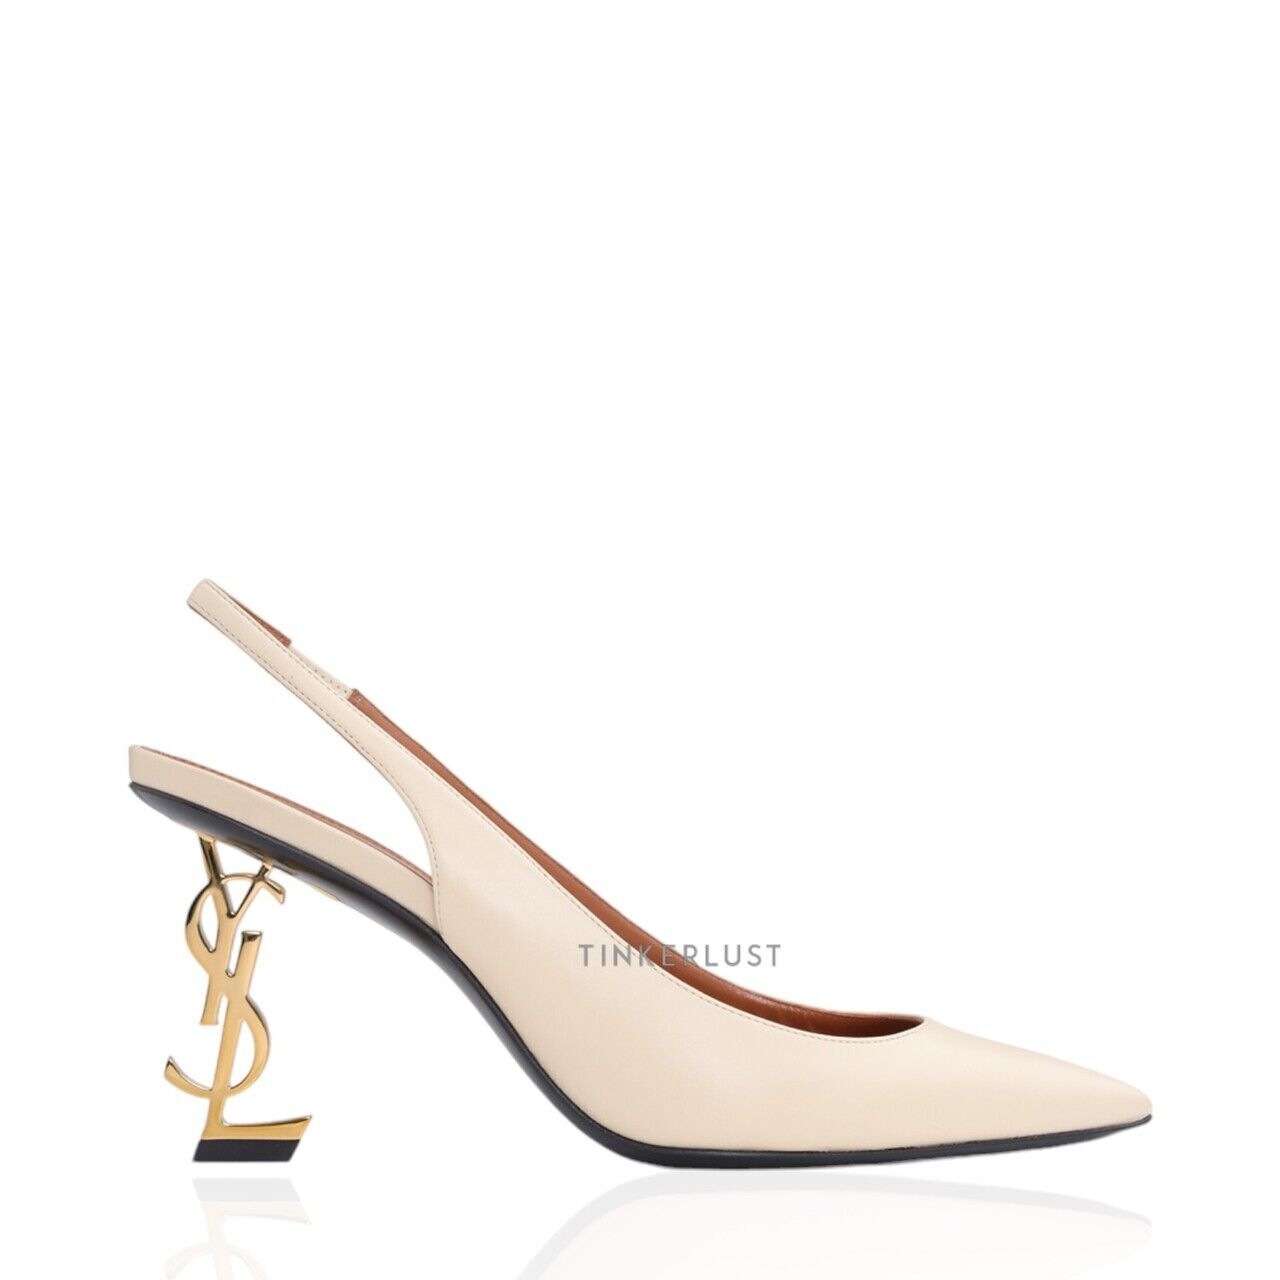 Saint Laurent Opyum Slingback Pump 85mm in Real Beige Smooth Leather with Gold Logo Heel